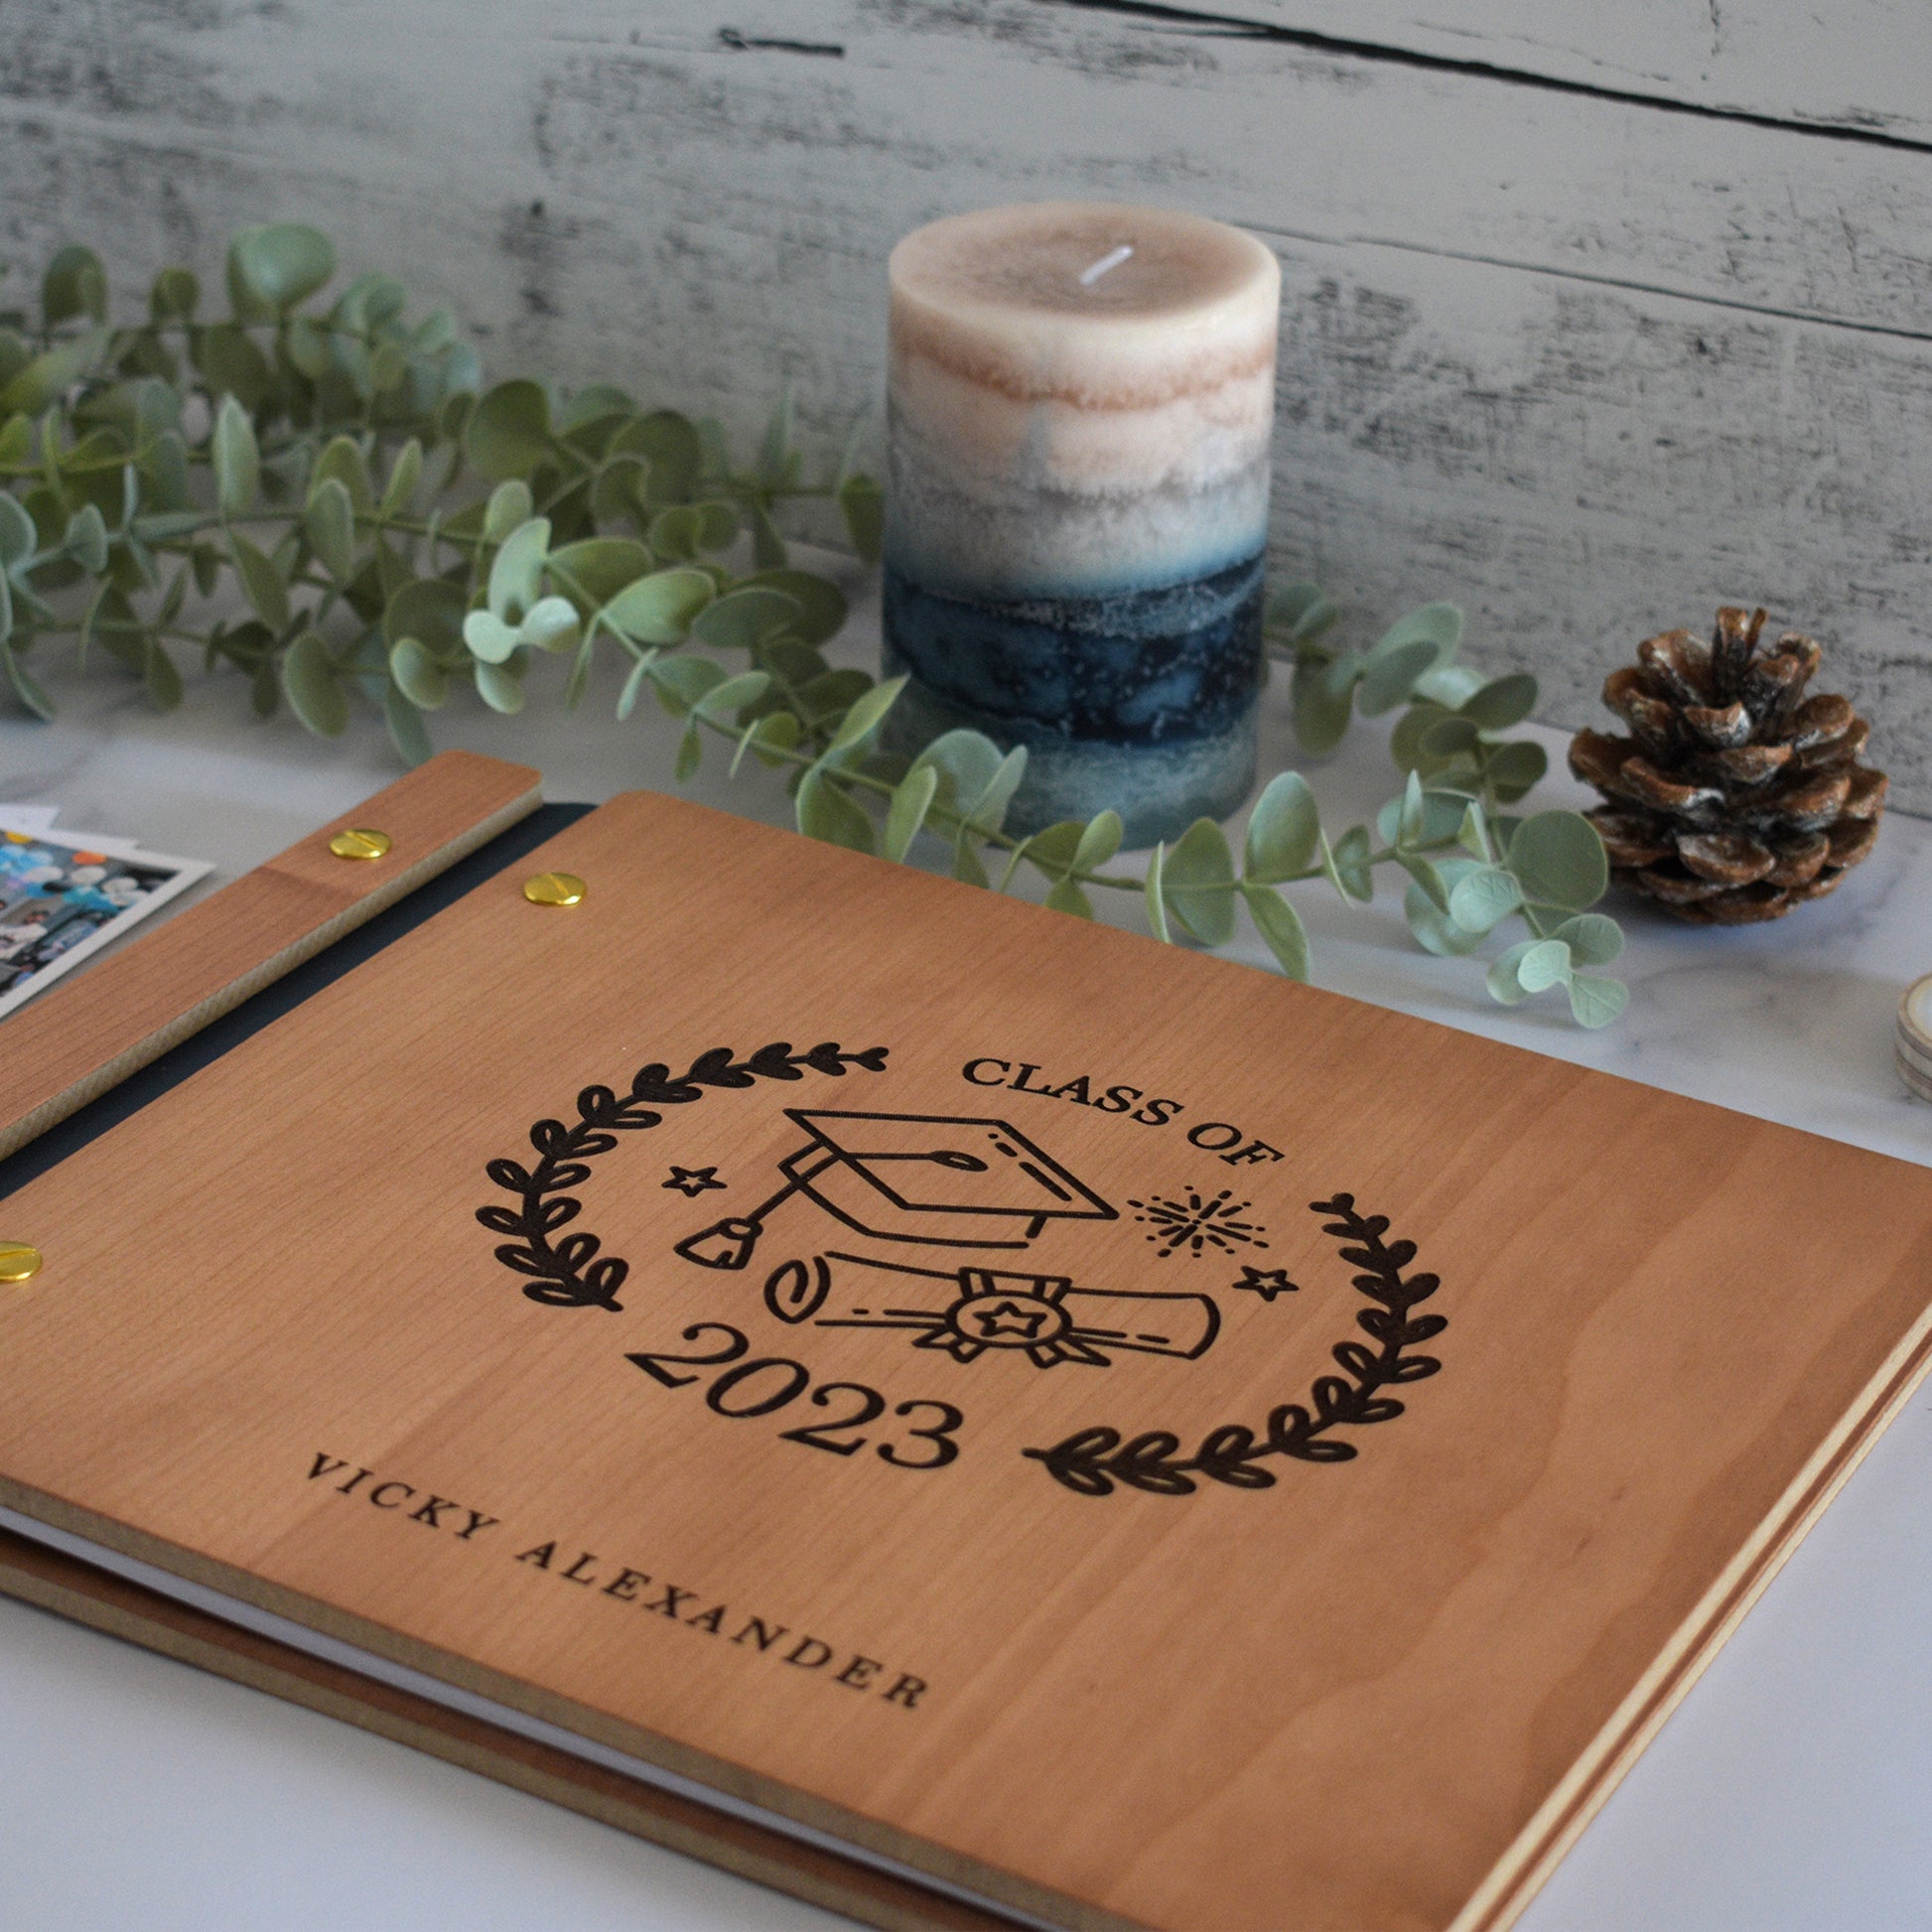 An 8.5x11" sized guest book lies on a table with greenery and a candle. The guest book includes a personalized engraving that reads Graduate 2023 along with the University name and Student name. The guest book also includes a cut out frame with a photo of the graduate.